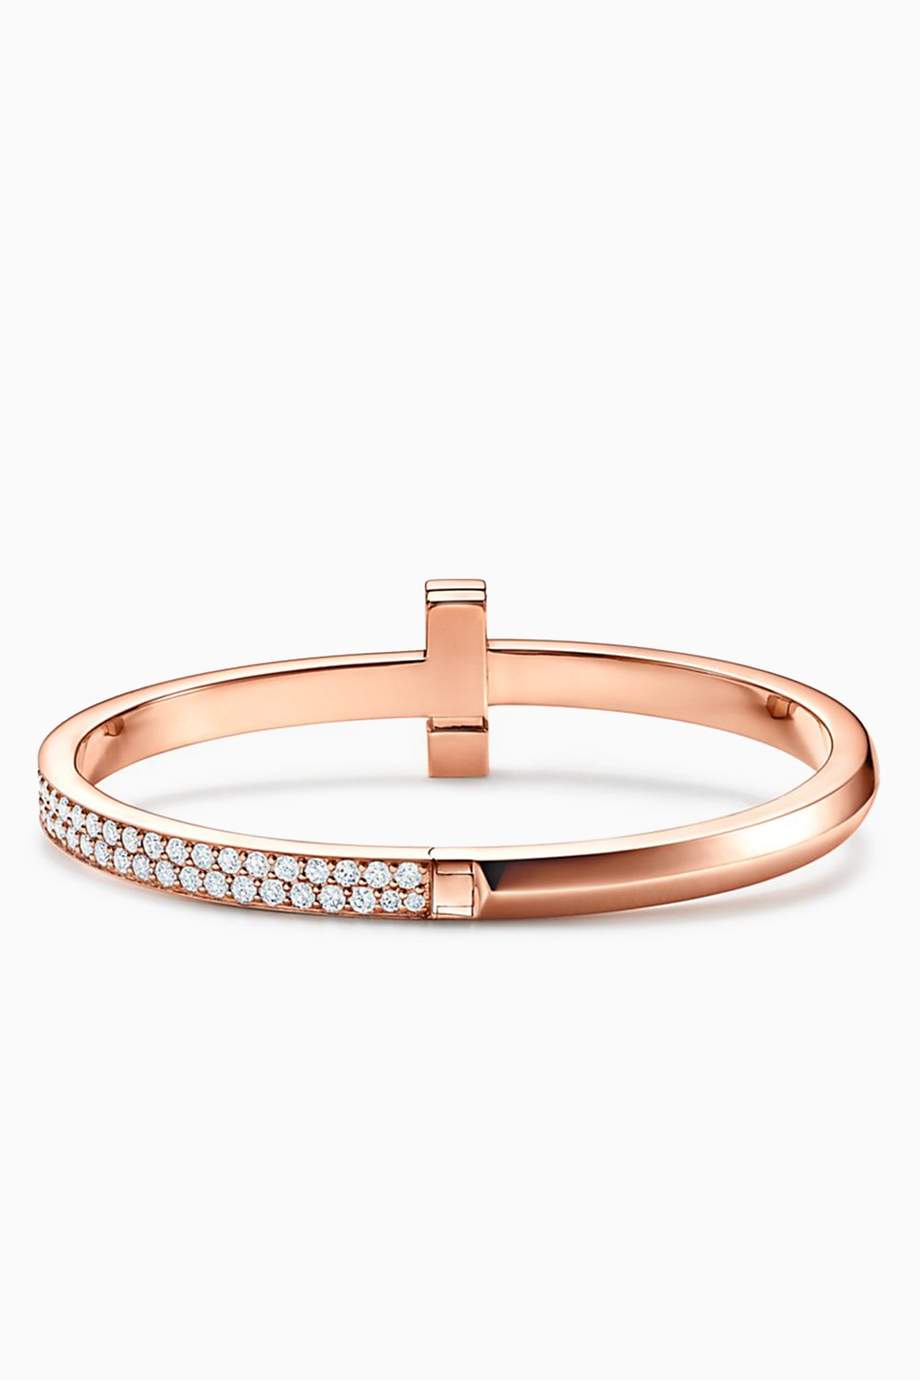 Shop Tiffany & Co. Rose Gold Tiffany T1 Wide Diamond Hinged Bangle in ...